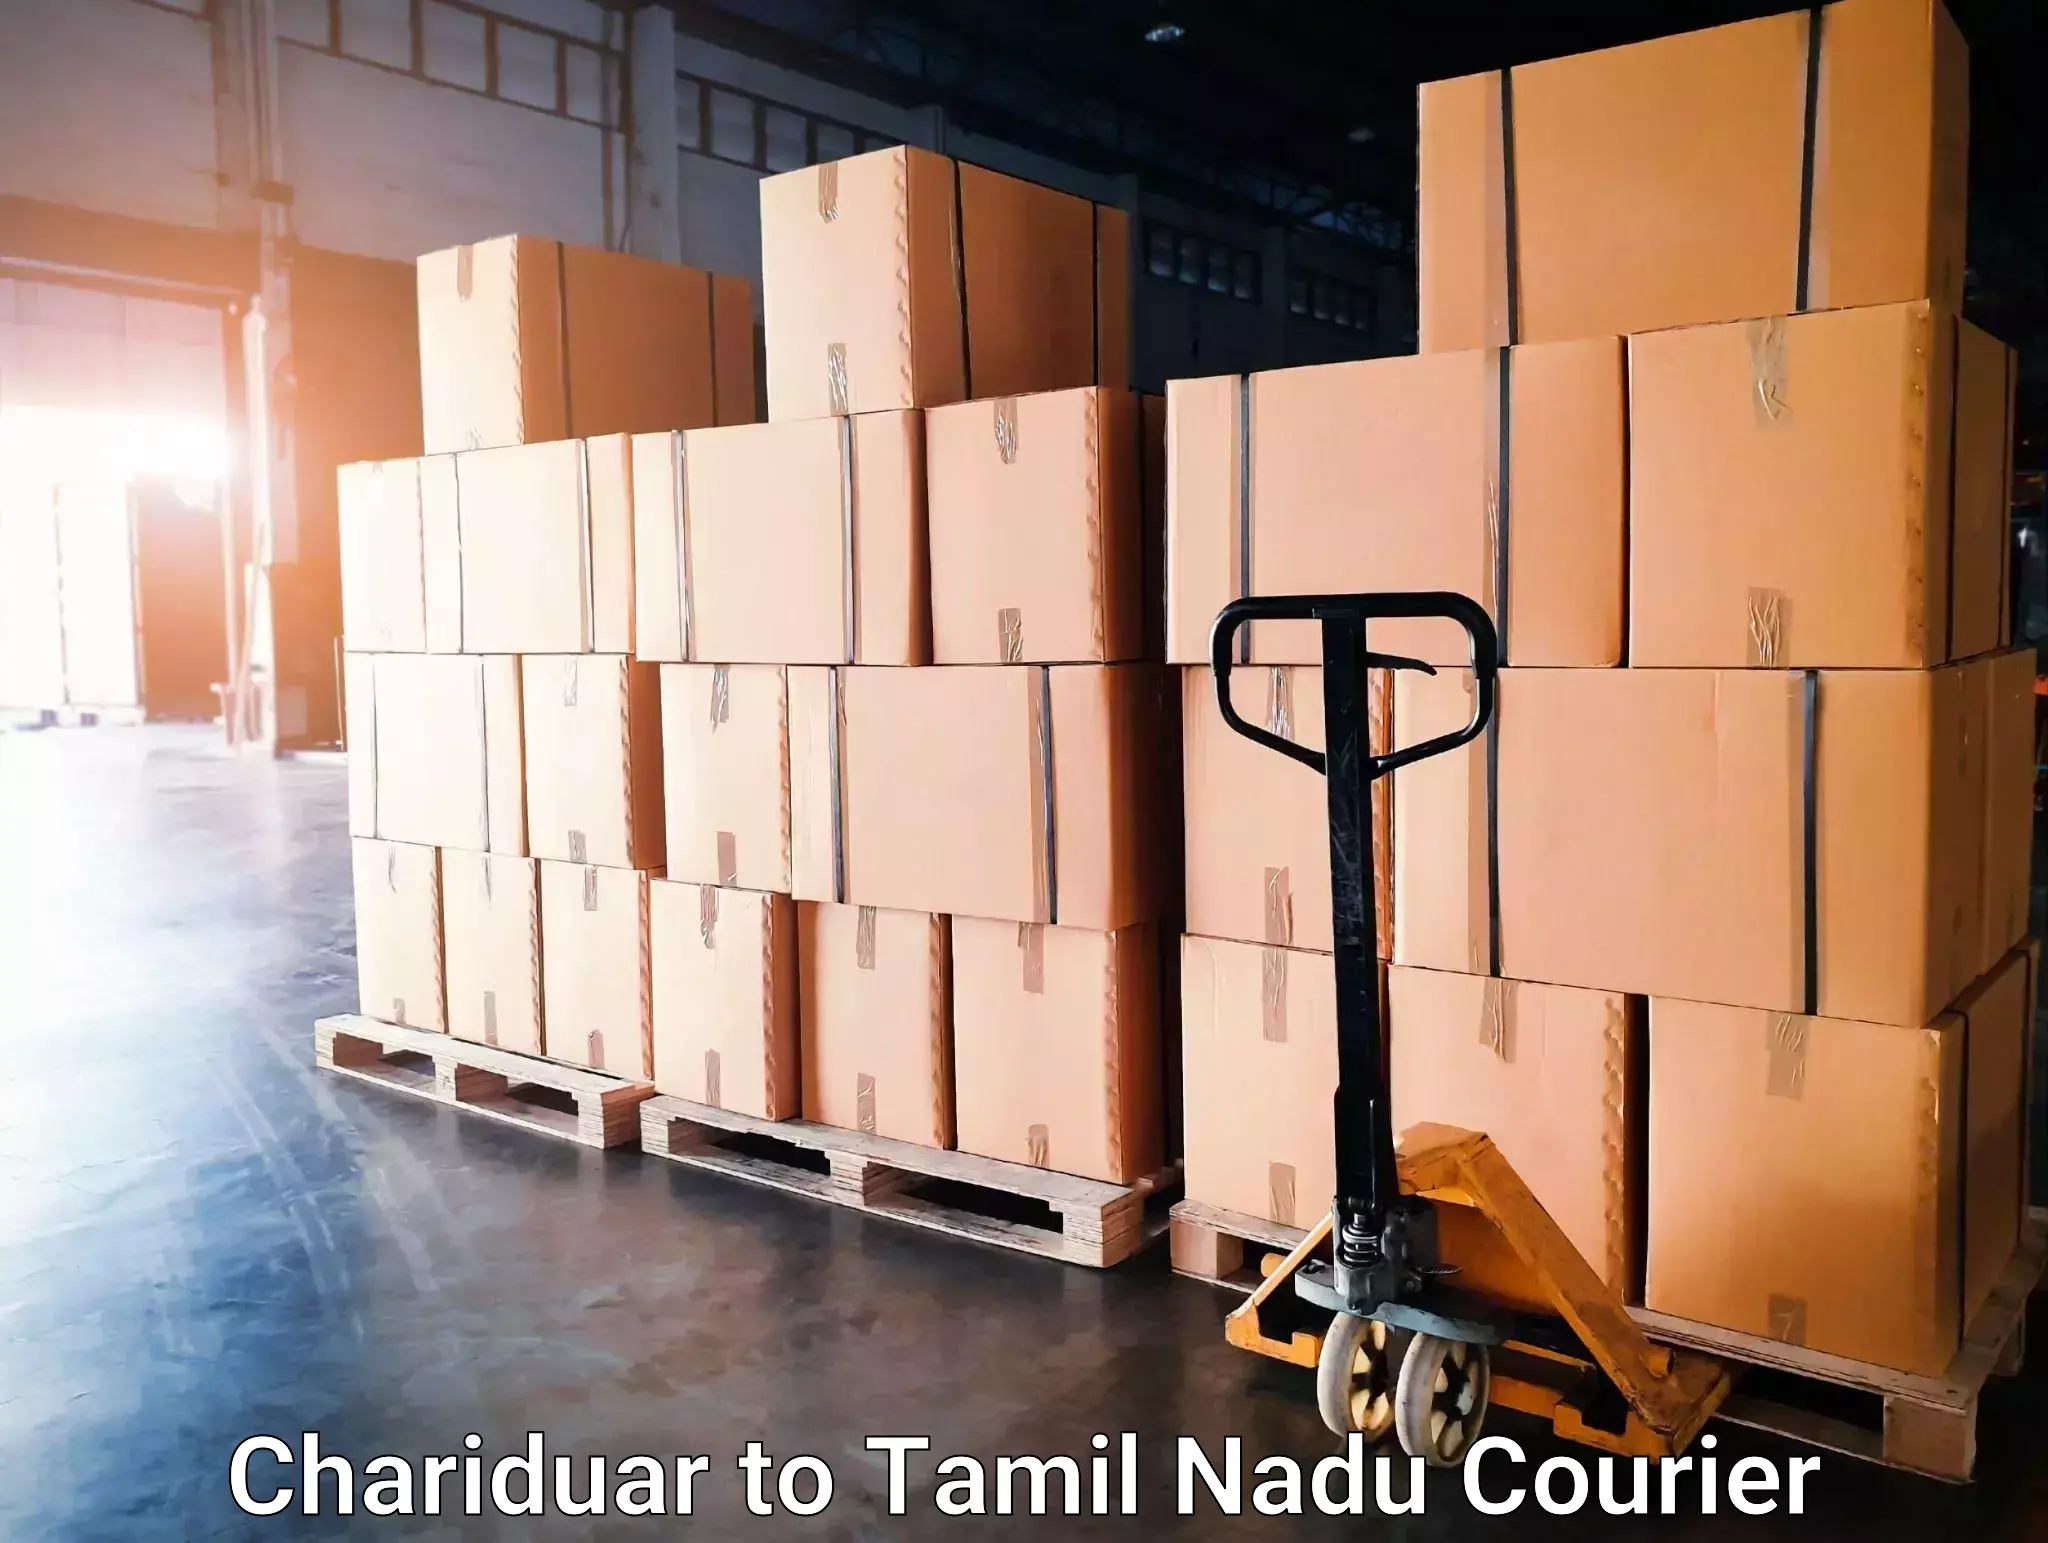 Flexible delivery schedules Chariduar to Avinashi